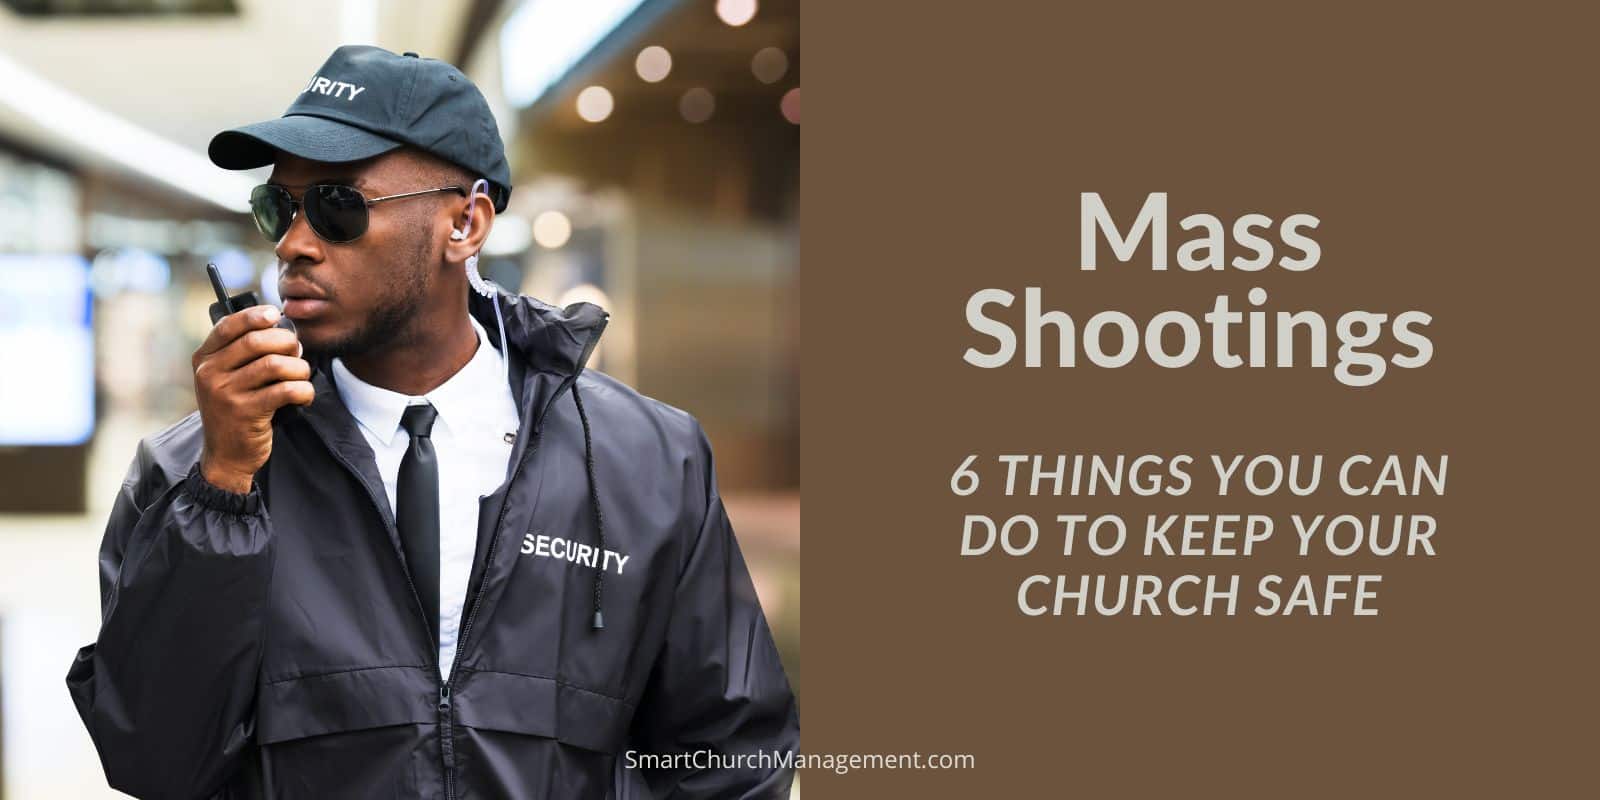 Tips to keep your church safe from armed intruders